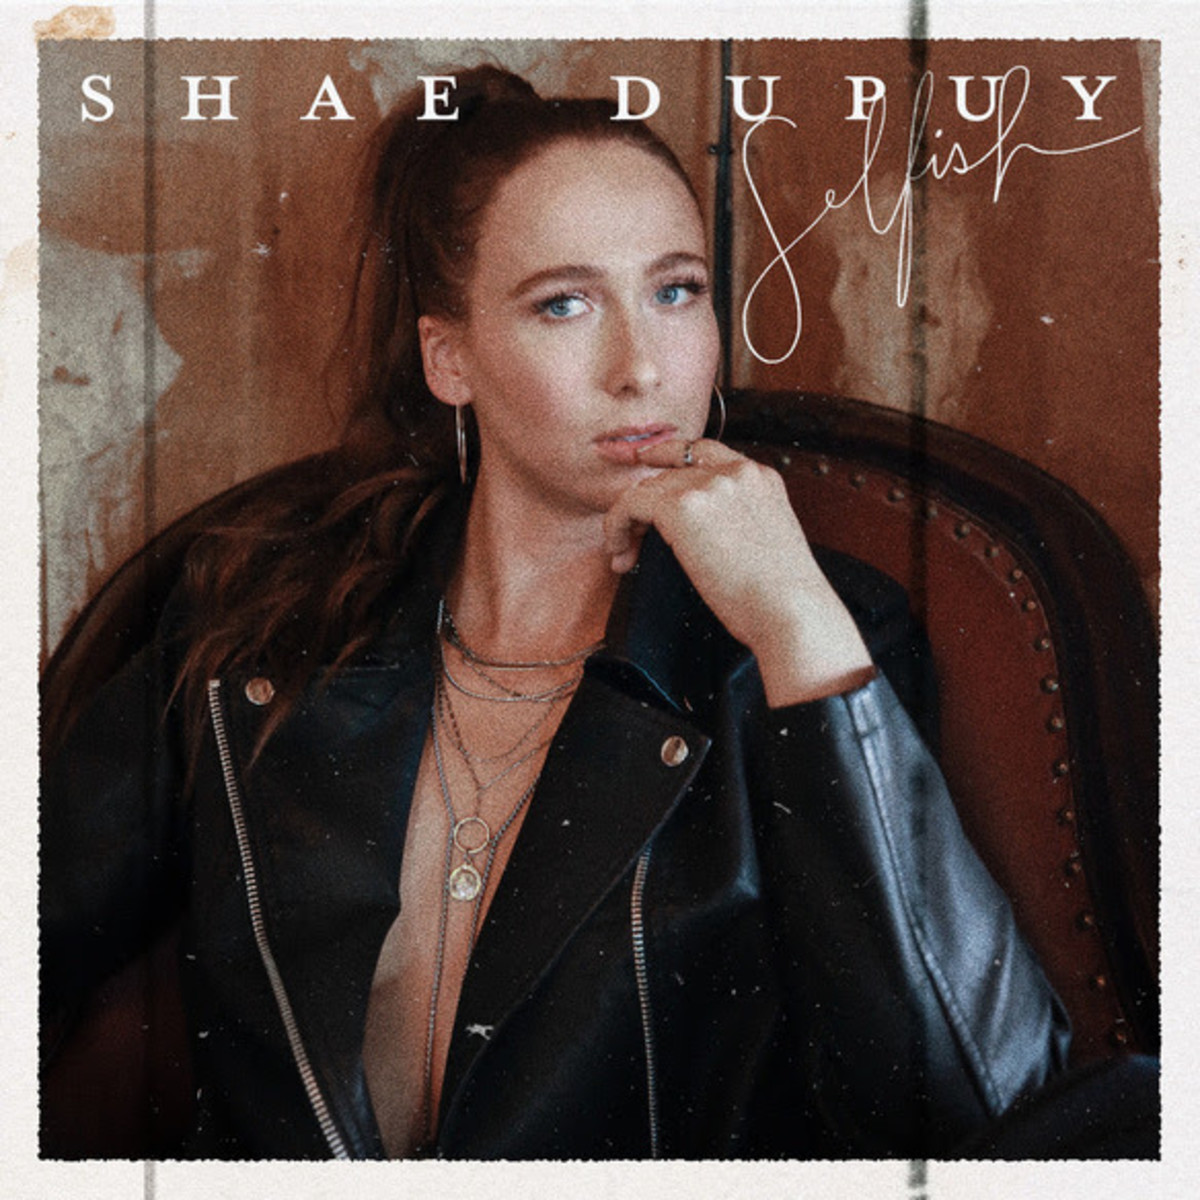 Canadian Country Singer Shae Dupuy Shares Her “Selfish” Side